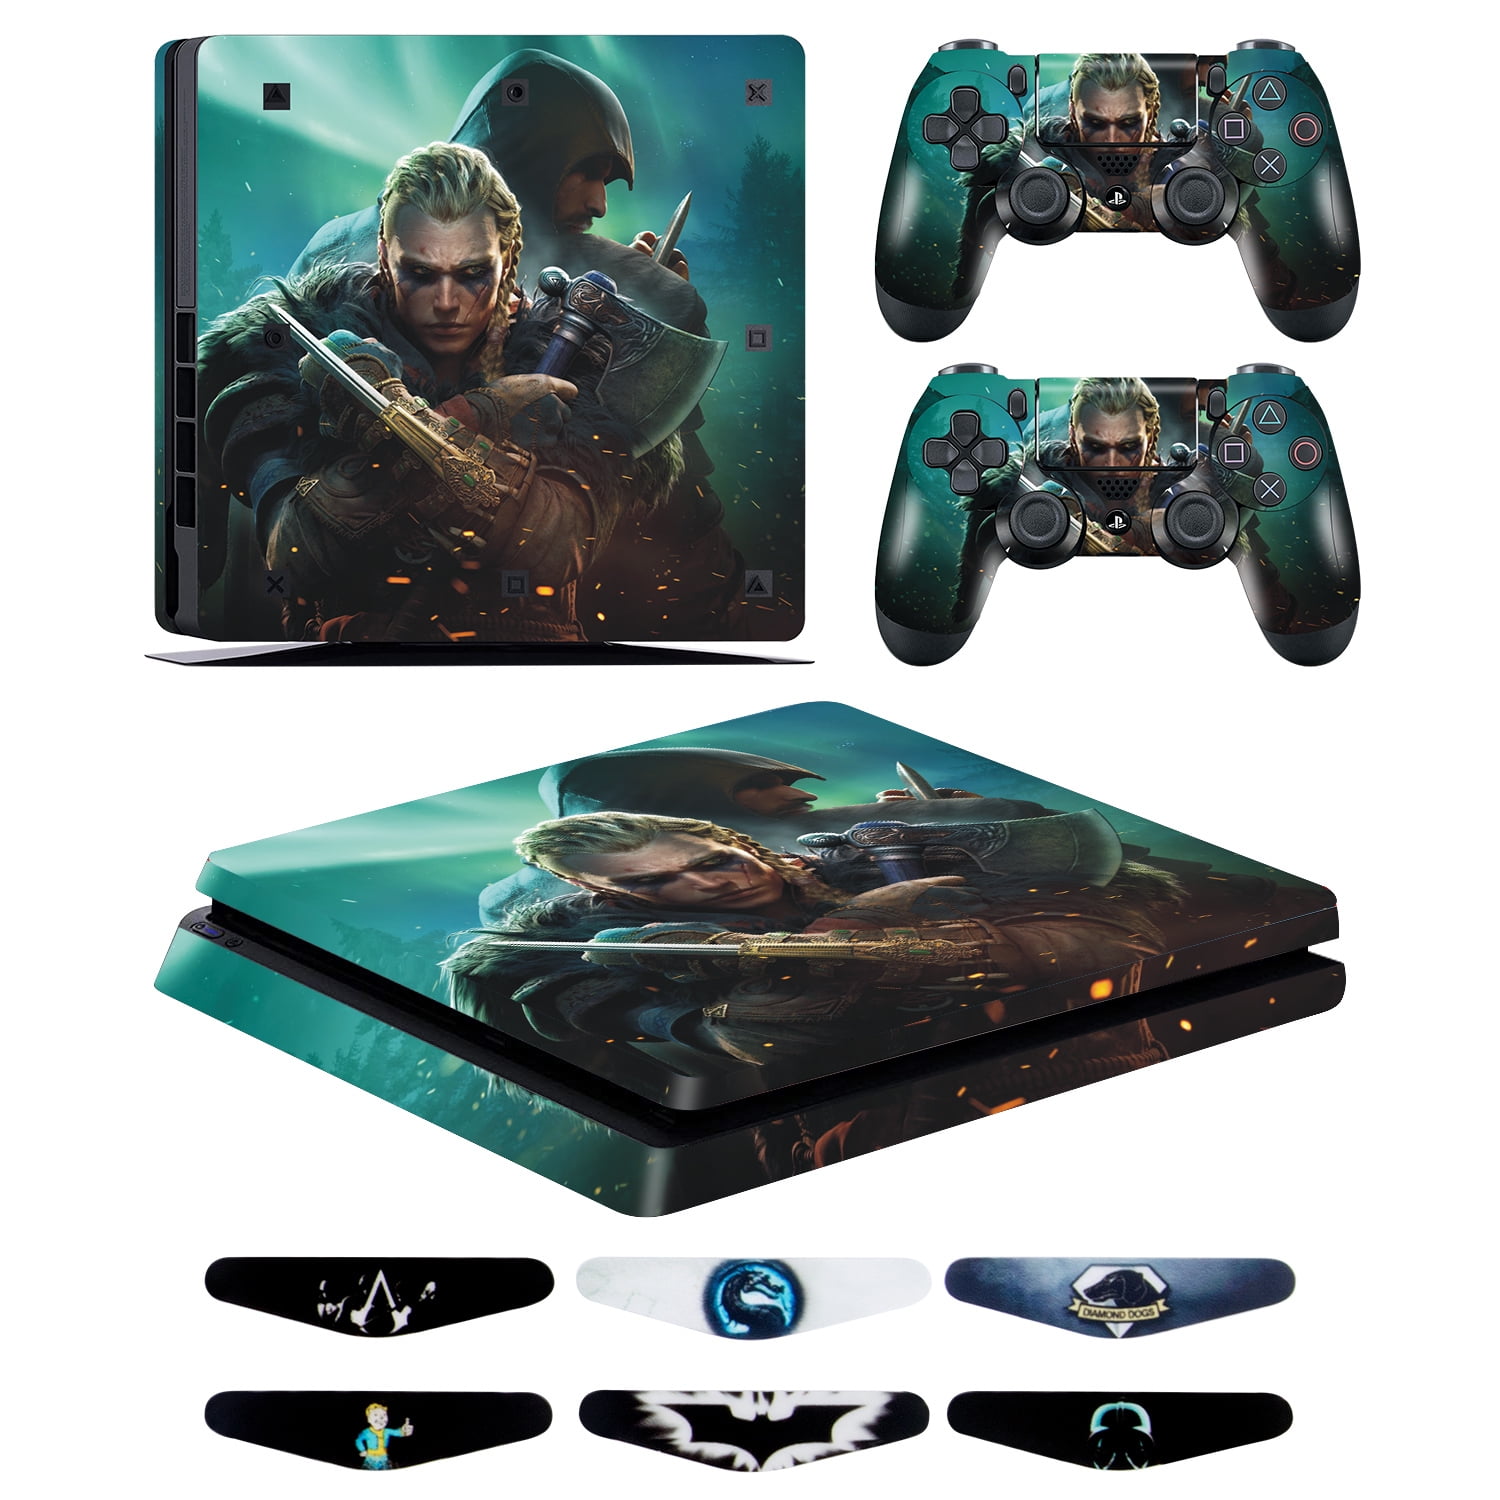 Ghost of Tsushima Game Skin for Sony Playstation 4 Pro - PS4 Pro Console